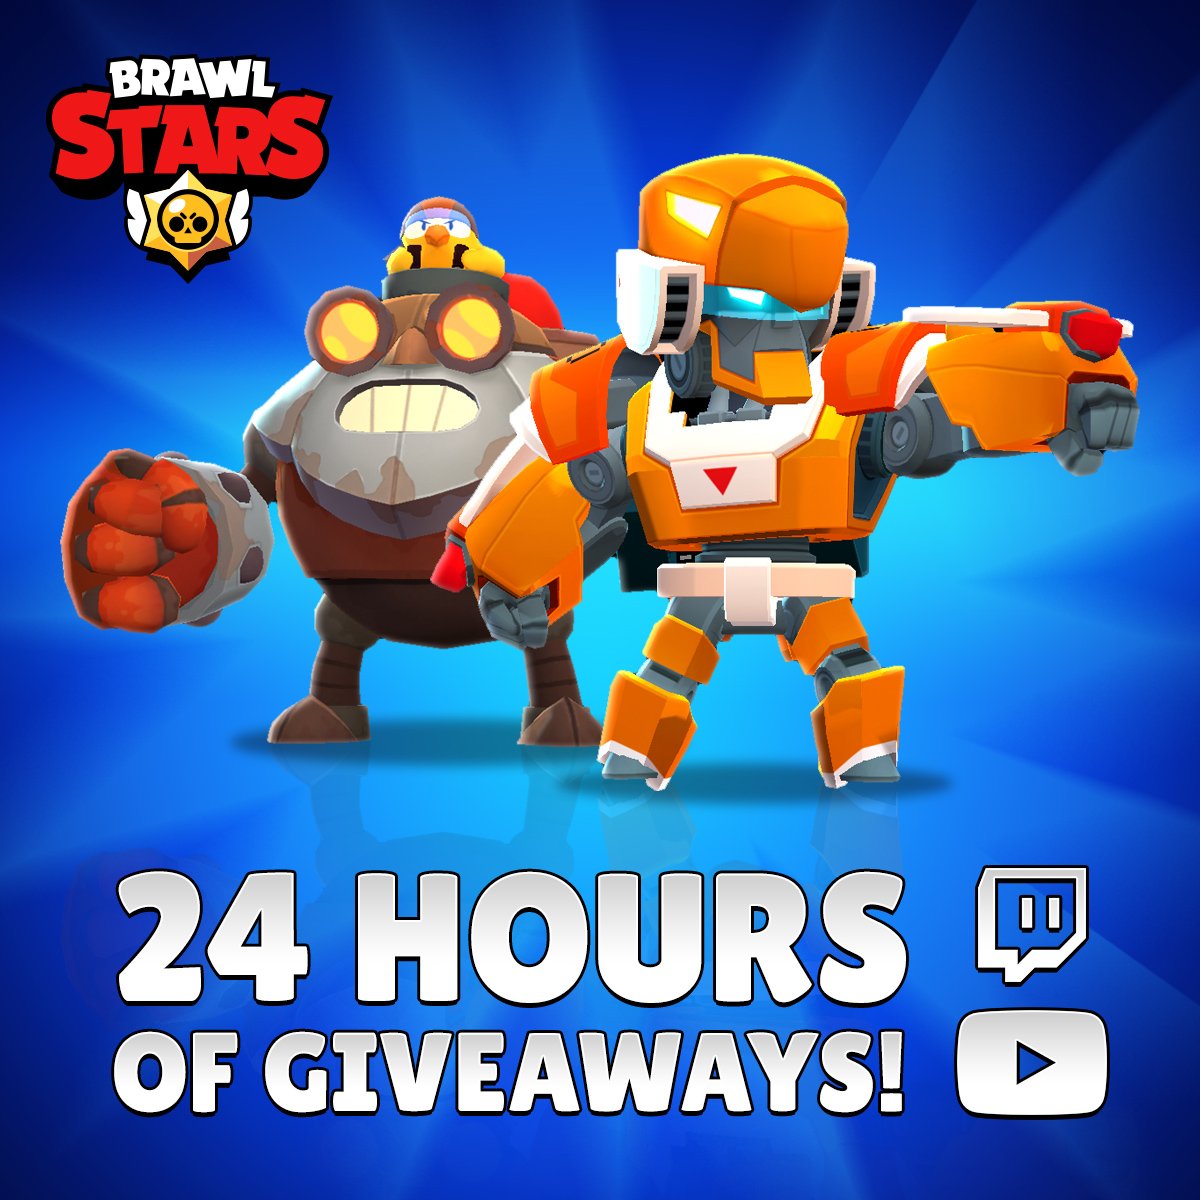 Brawl Stars Sur Twitter Retweet For A Chance To Winbrawlskins But If You Don T Get Lucky Don T Worry This Sunday July 14th More Than 30 Streamers Will Be Hosting Giveaways - brawl star skin mécha